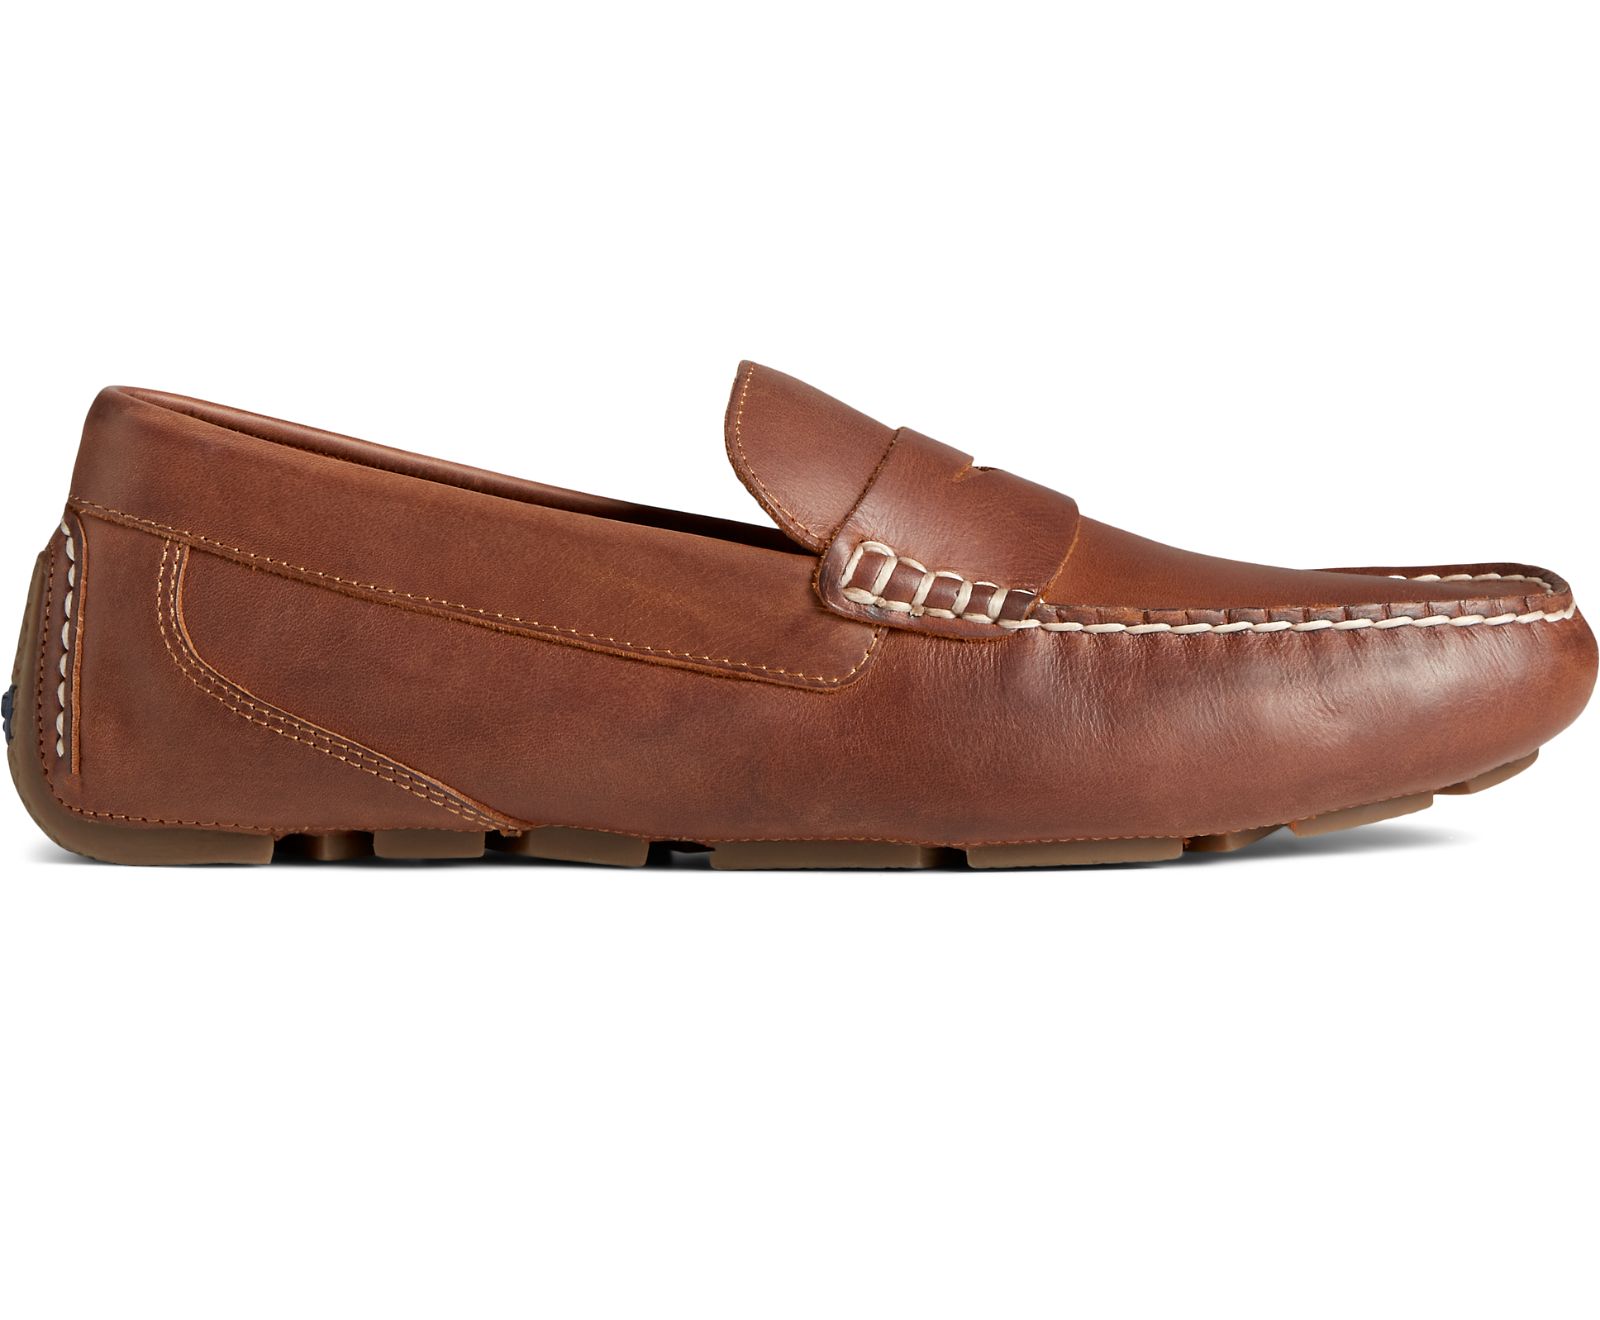 Men's Davenport Penny Loafer - Tan [sperry shoes 0345] - $101.00 ...